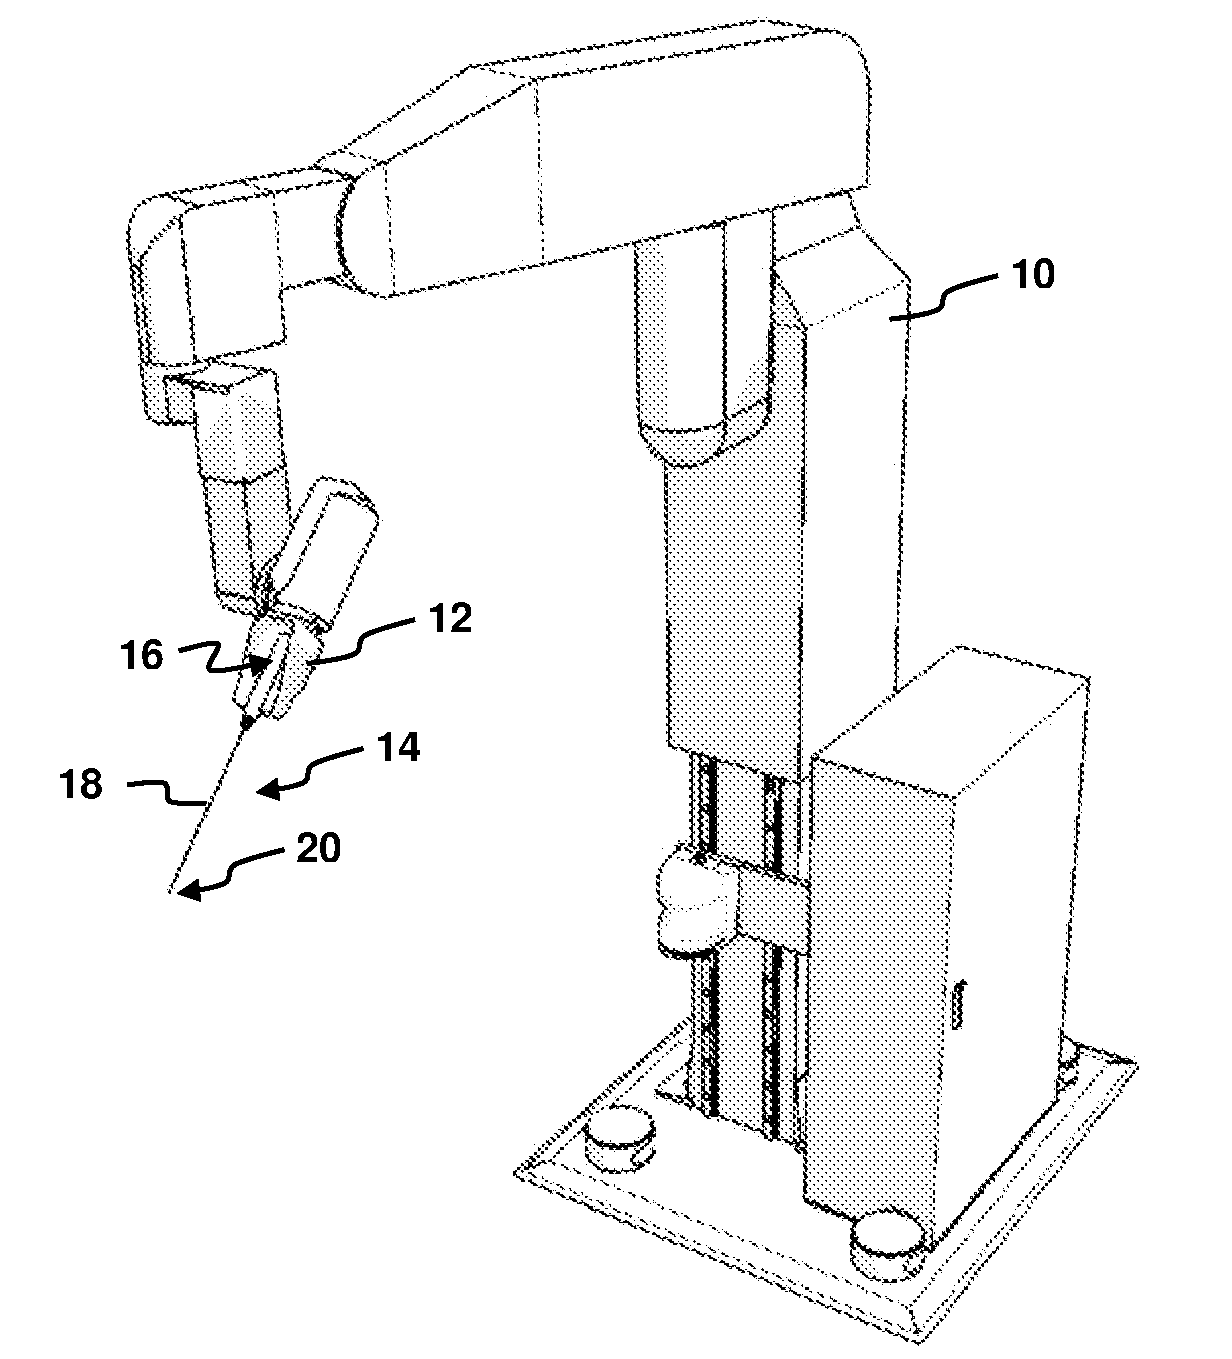 Force estimation for a minimally invasive robotic surgery system